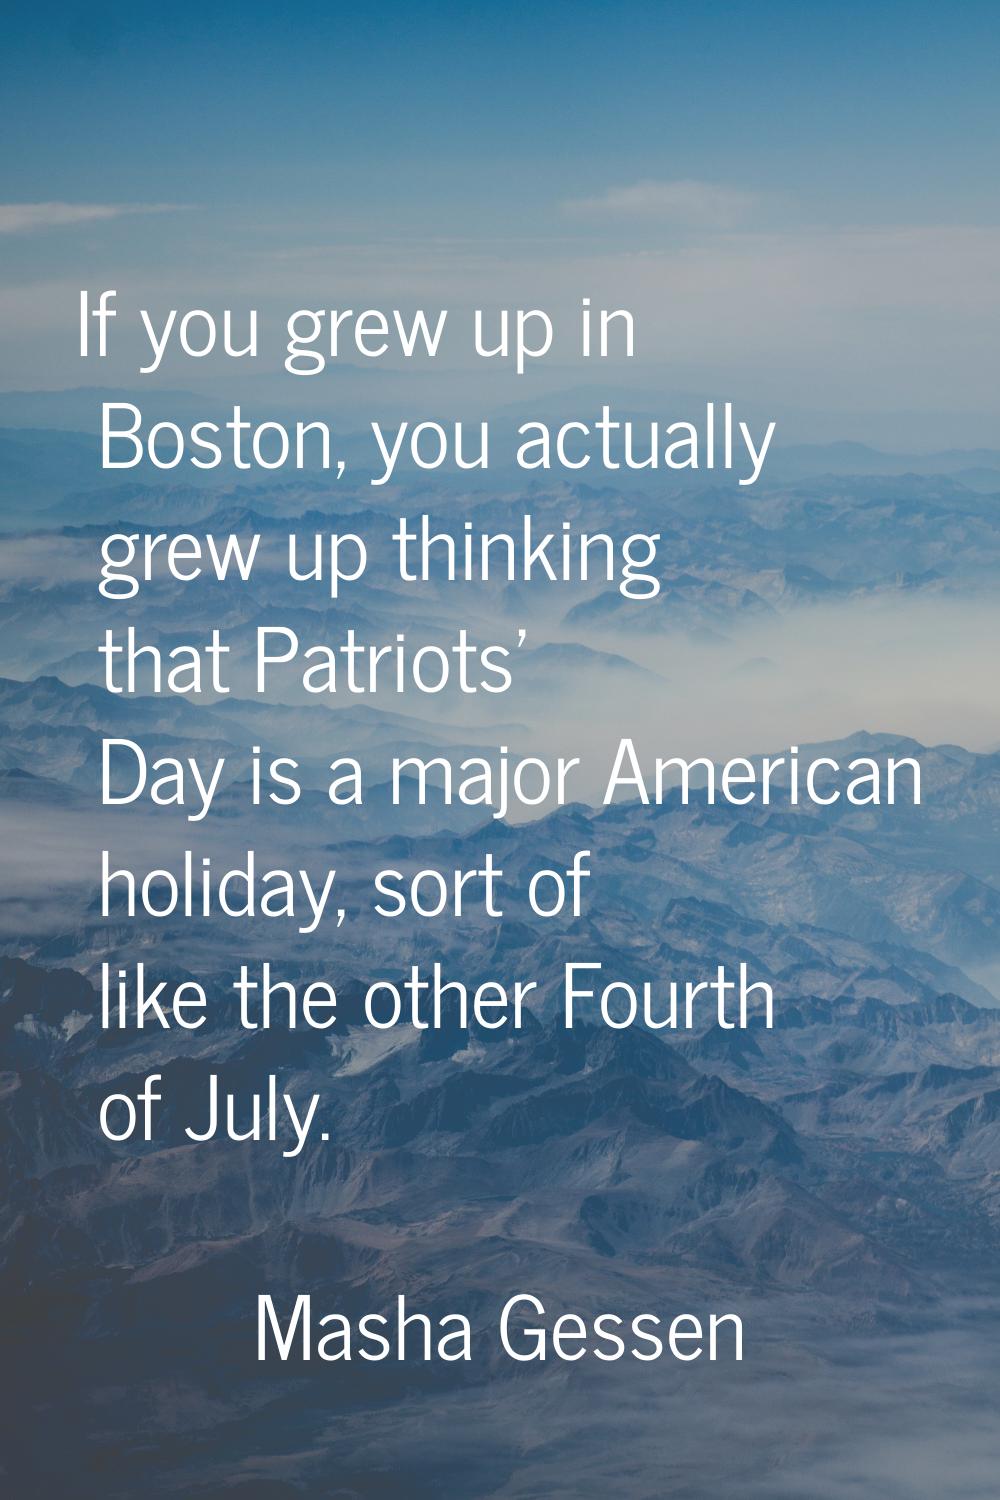 If you grew up in Boston, you actually grew up thinking that Patriots' Day is a major American holi